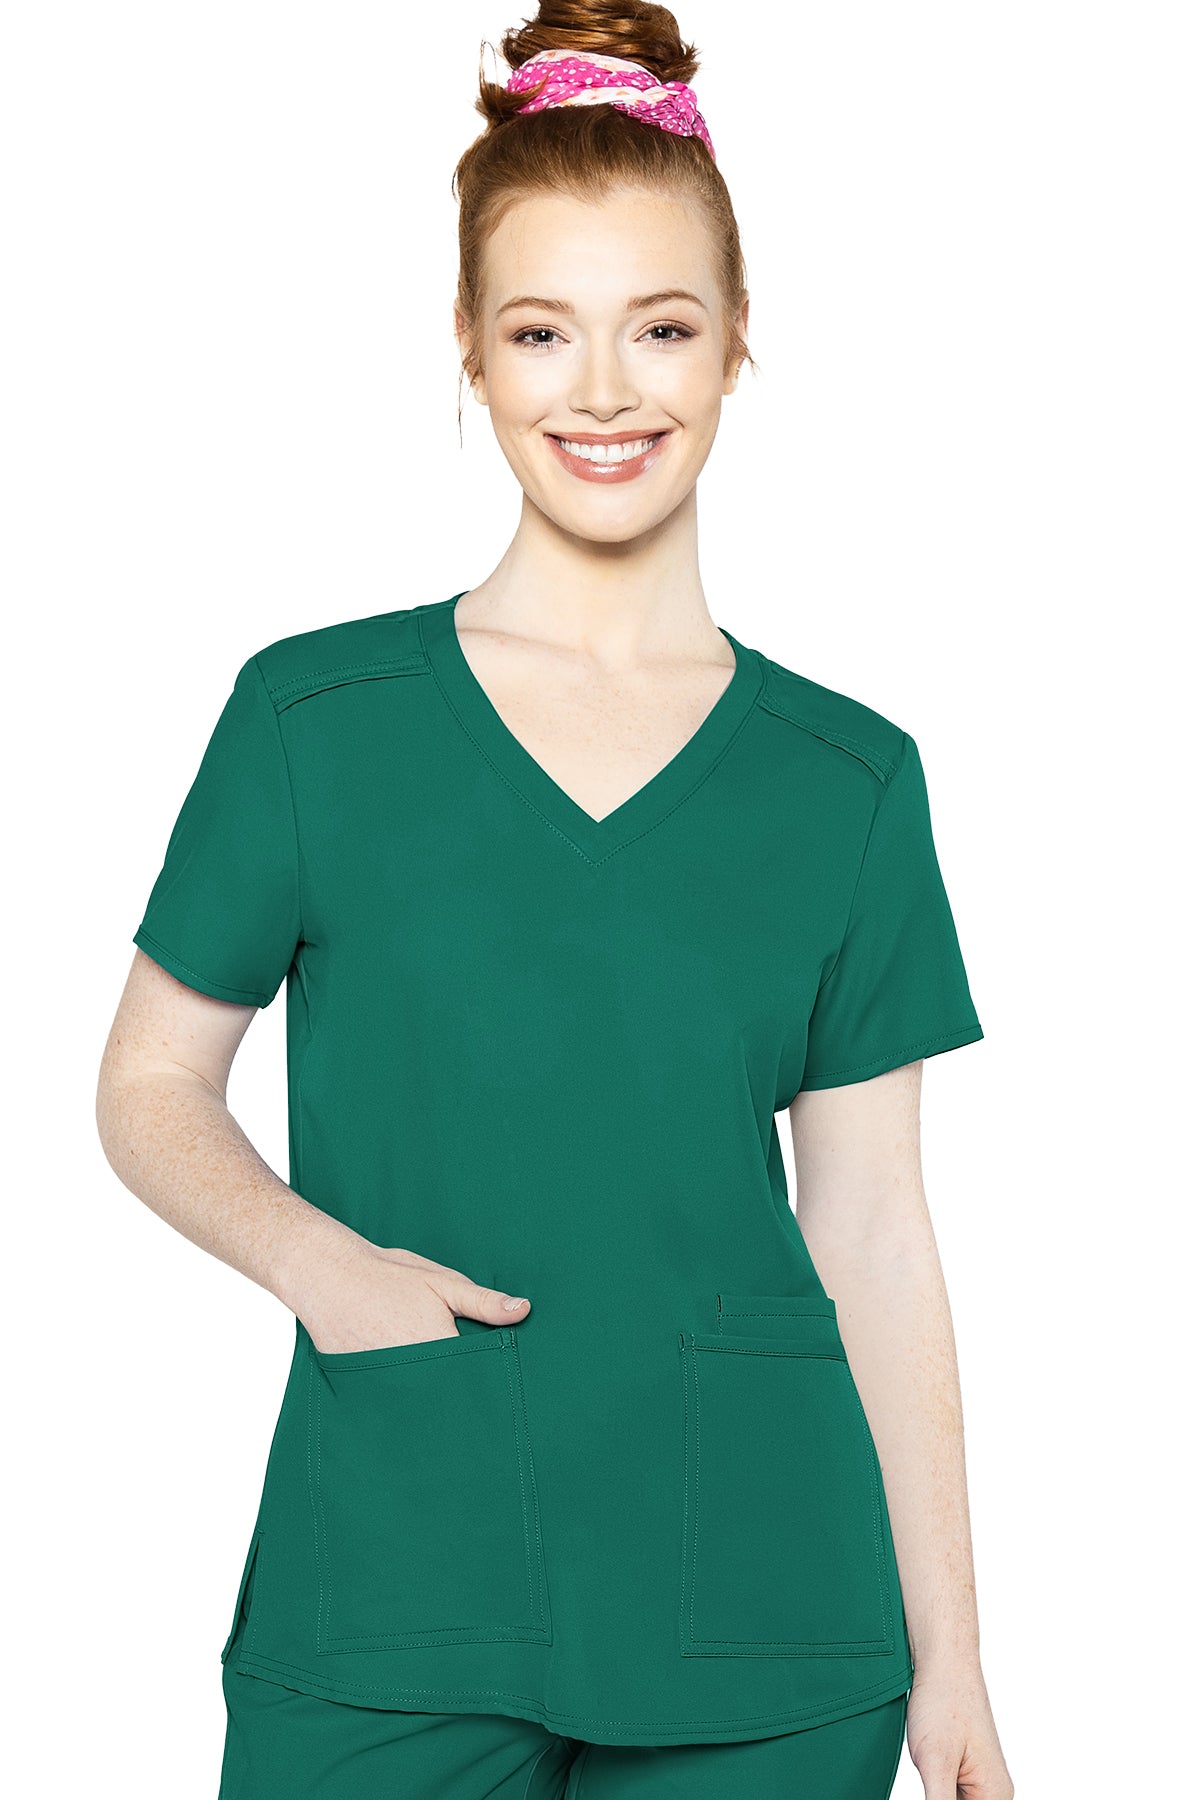 Med Couture Scrub Top Insight Classic V-Neck 3 Pocket in Hunter at Parker's Clothing and Shoes.